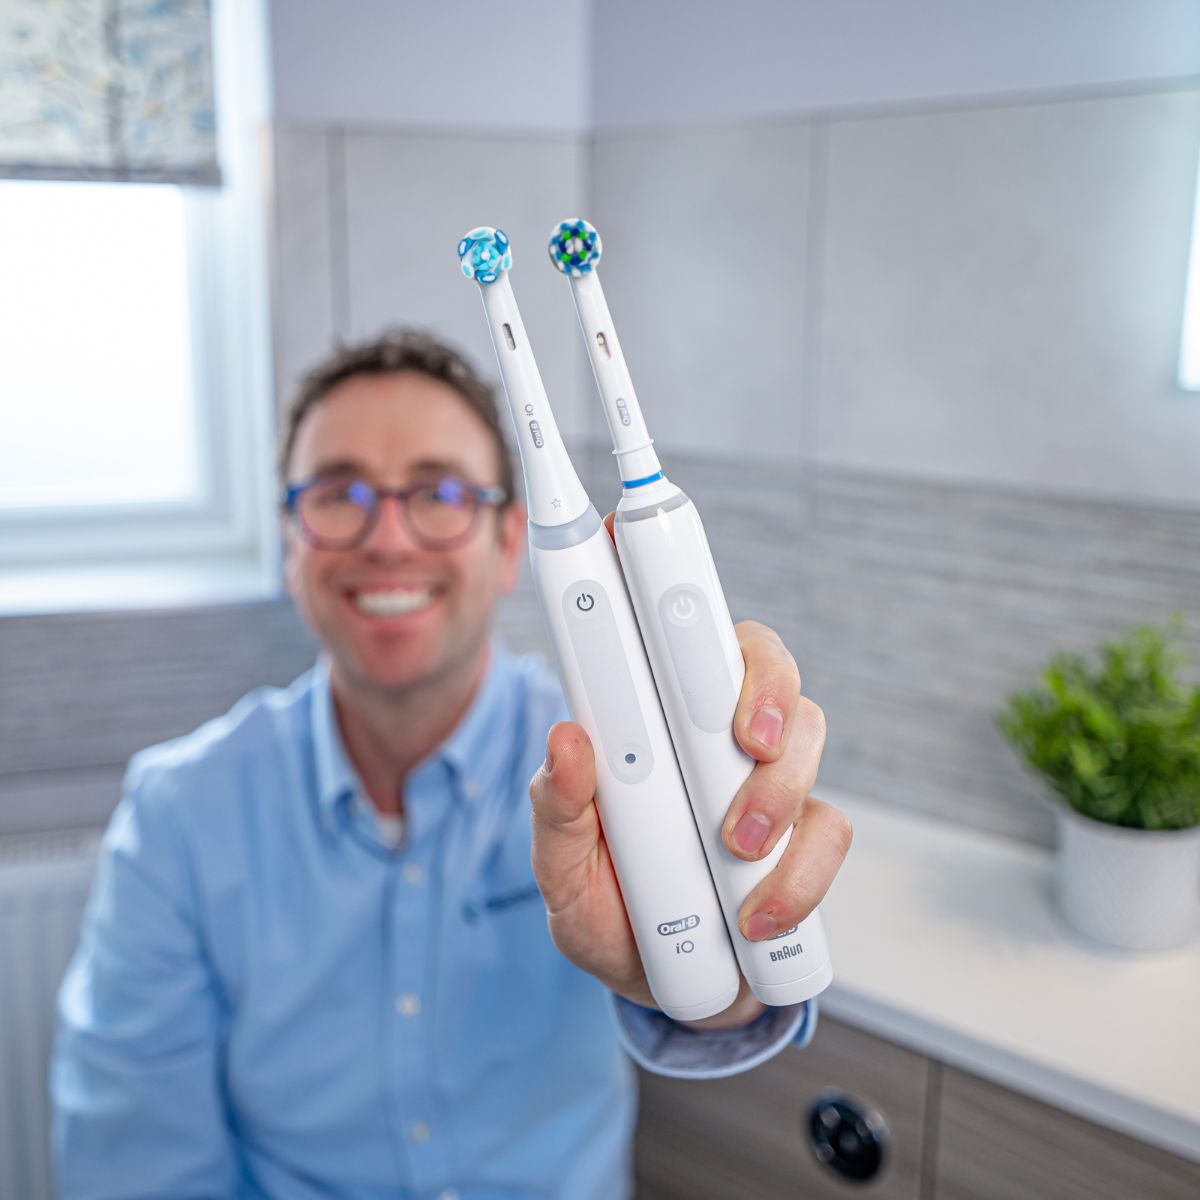 Jon holding the iO Series 3 and the Pro 3 from Oral-B.